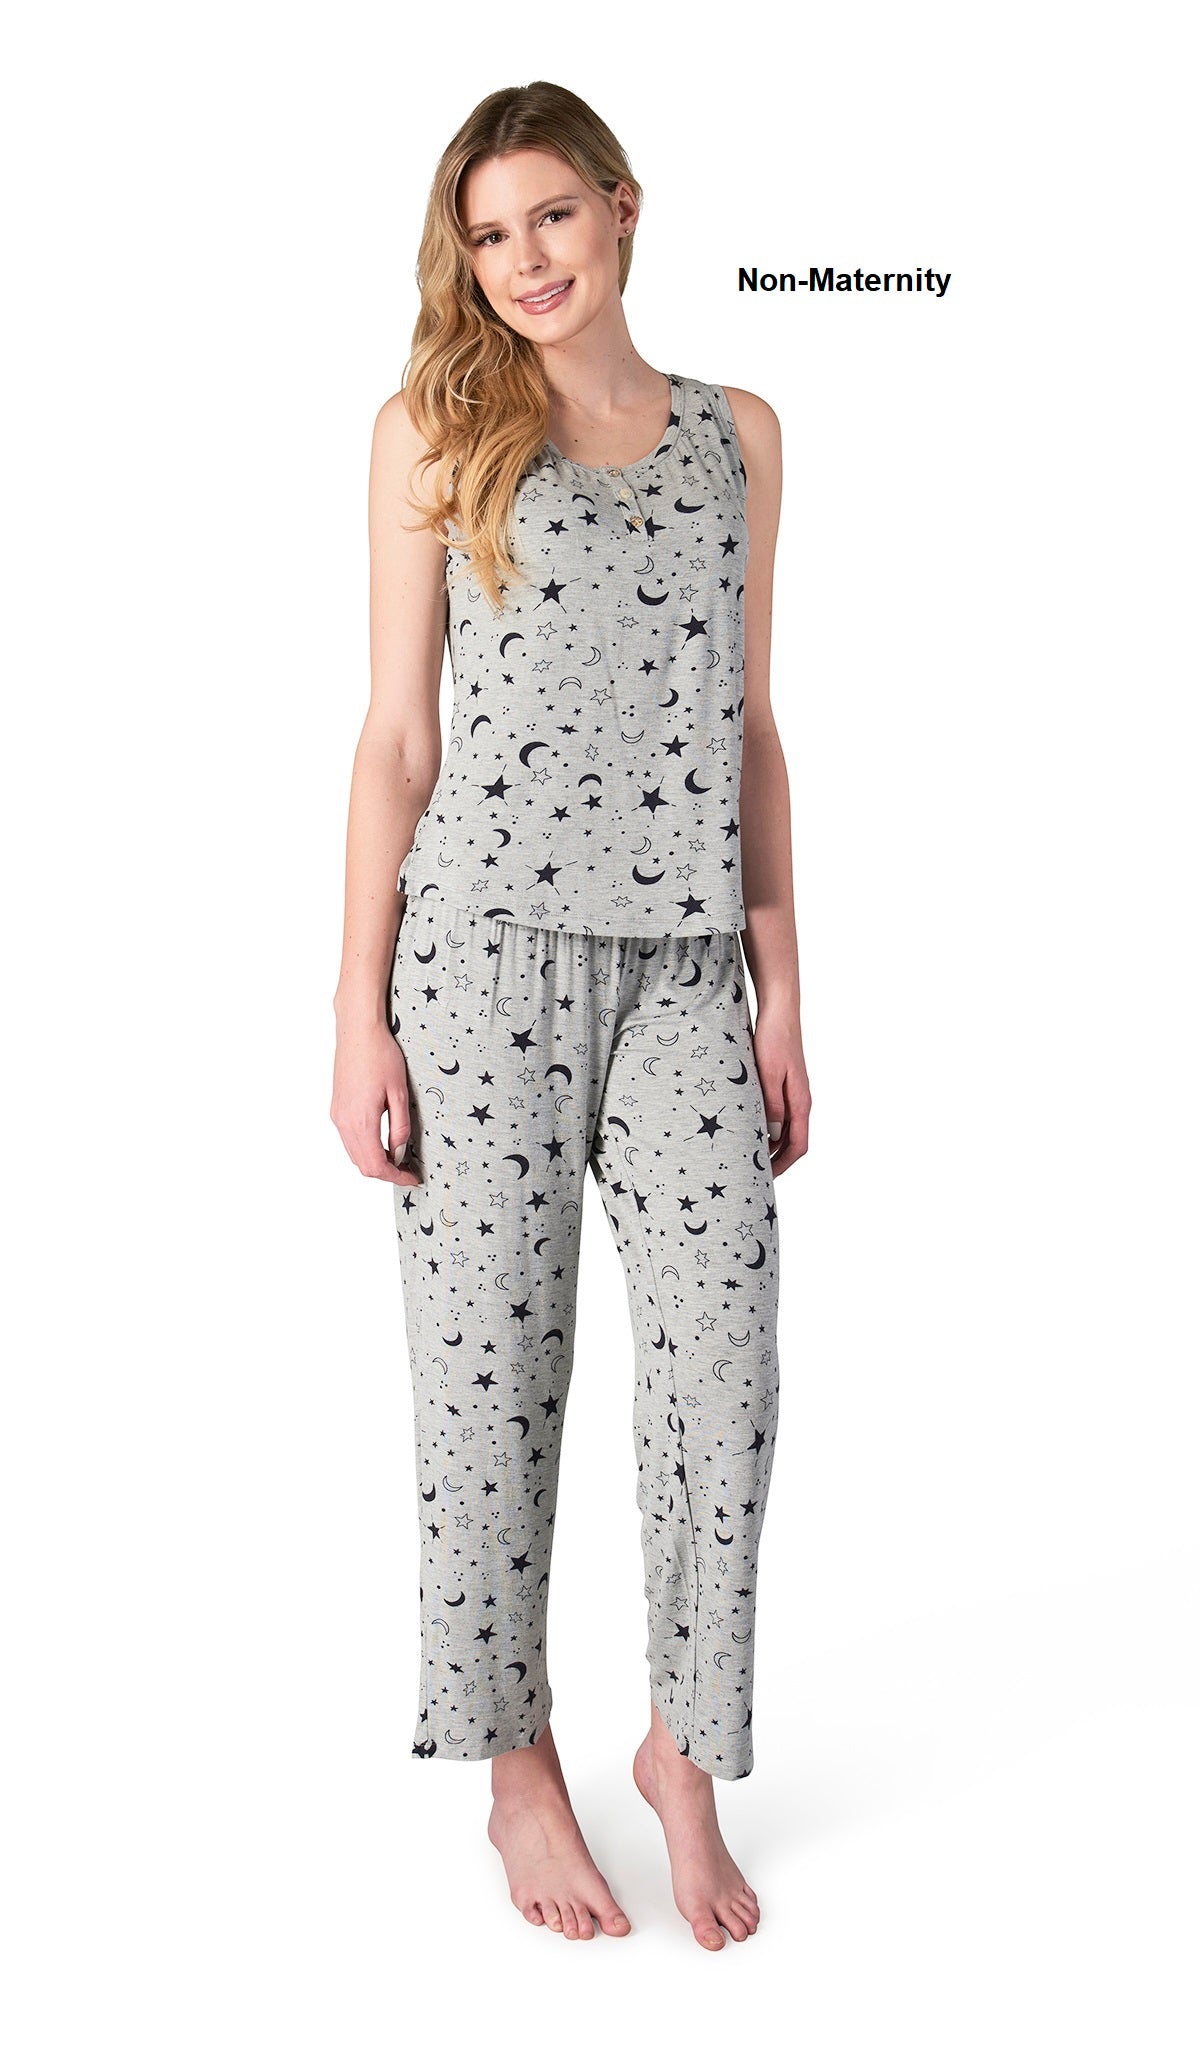 Twinkle Night Joy 2-Piece Set. Woman wearing button front placket tank top and pant as non-maternity.